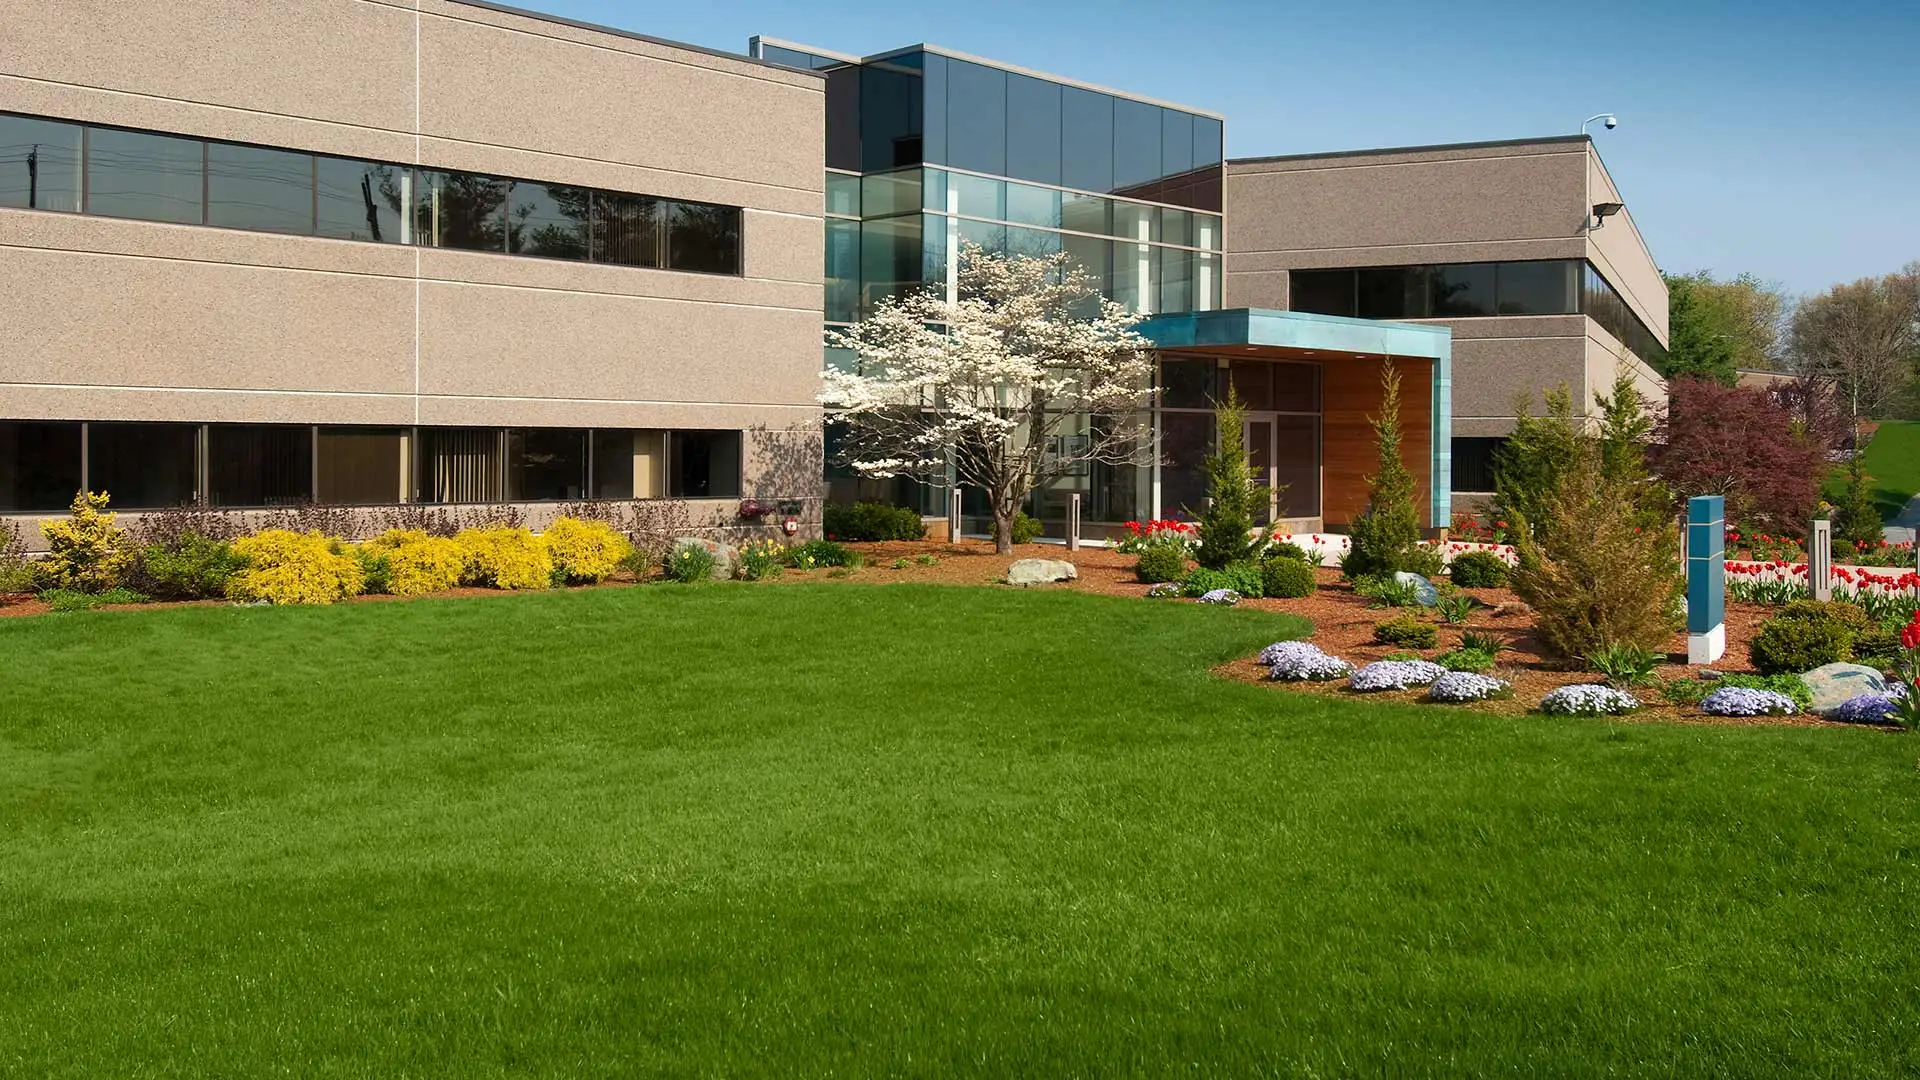 Commercial property with healthy lawn in Ankeny, Iowa.